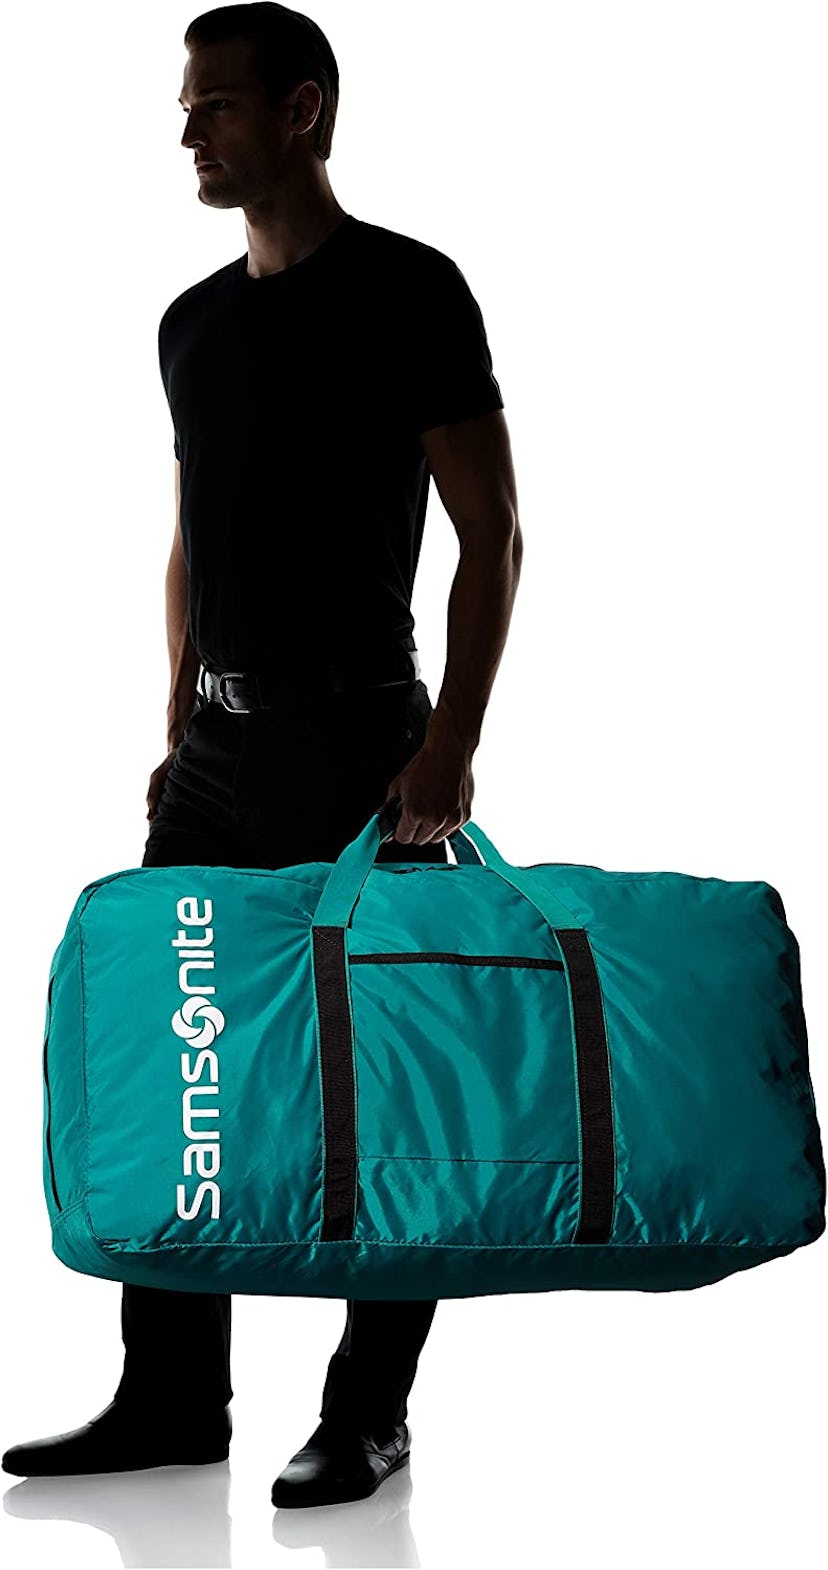 Man carrying Samsonite duffel bag, one of the best gifts for college students